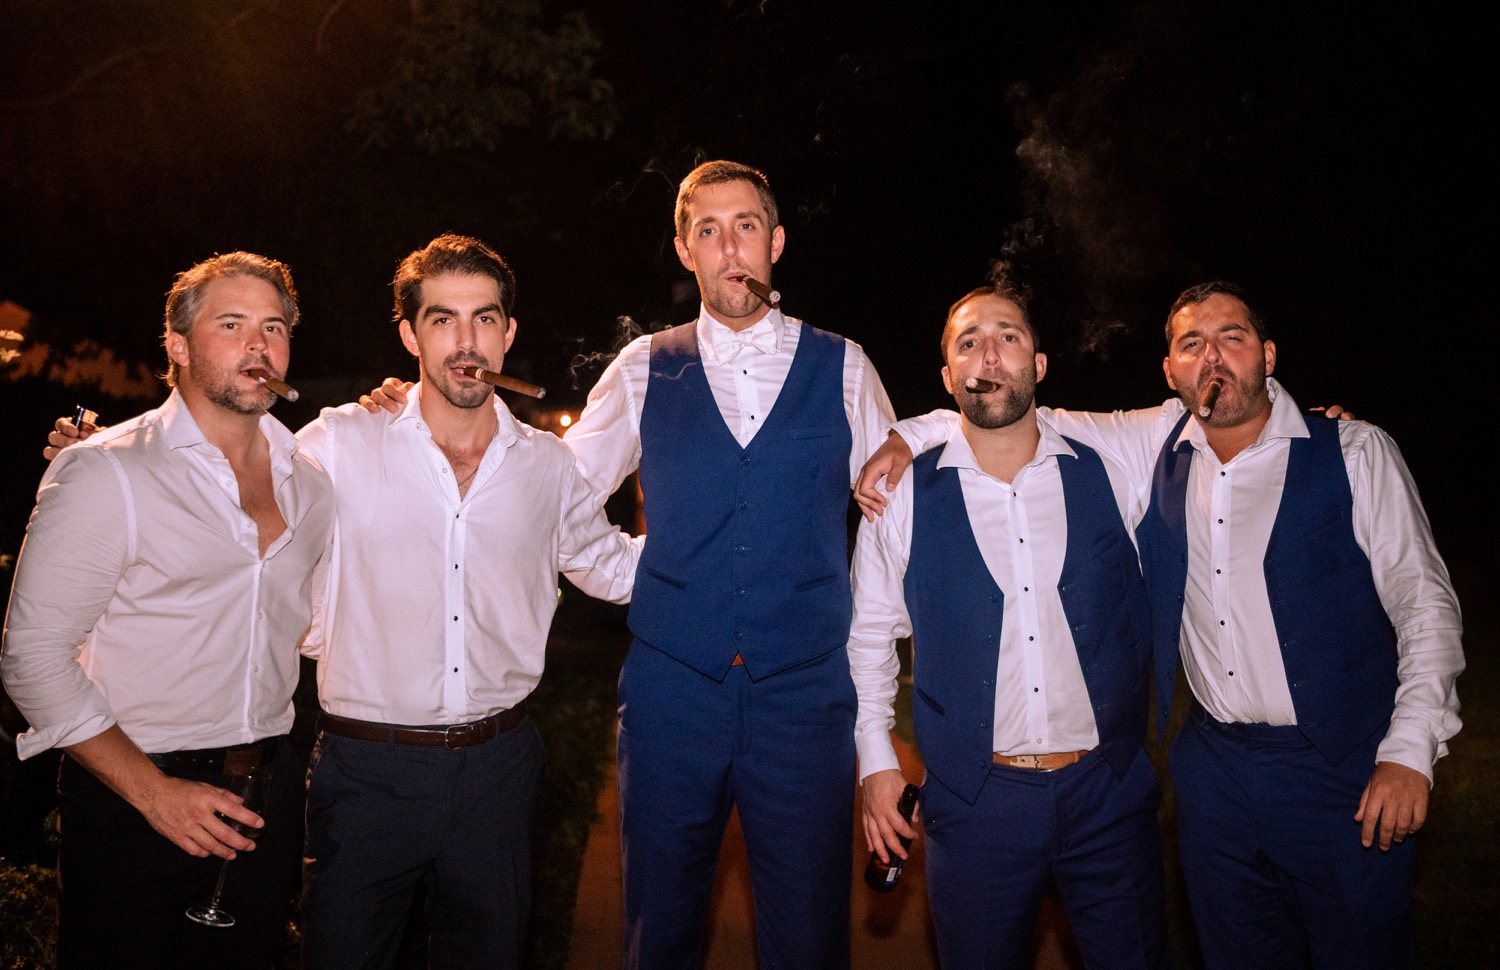 groom and groomsmen smoking cigars at the wedding reception in Charlottesville, Virginia